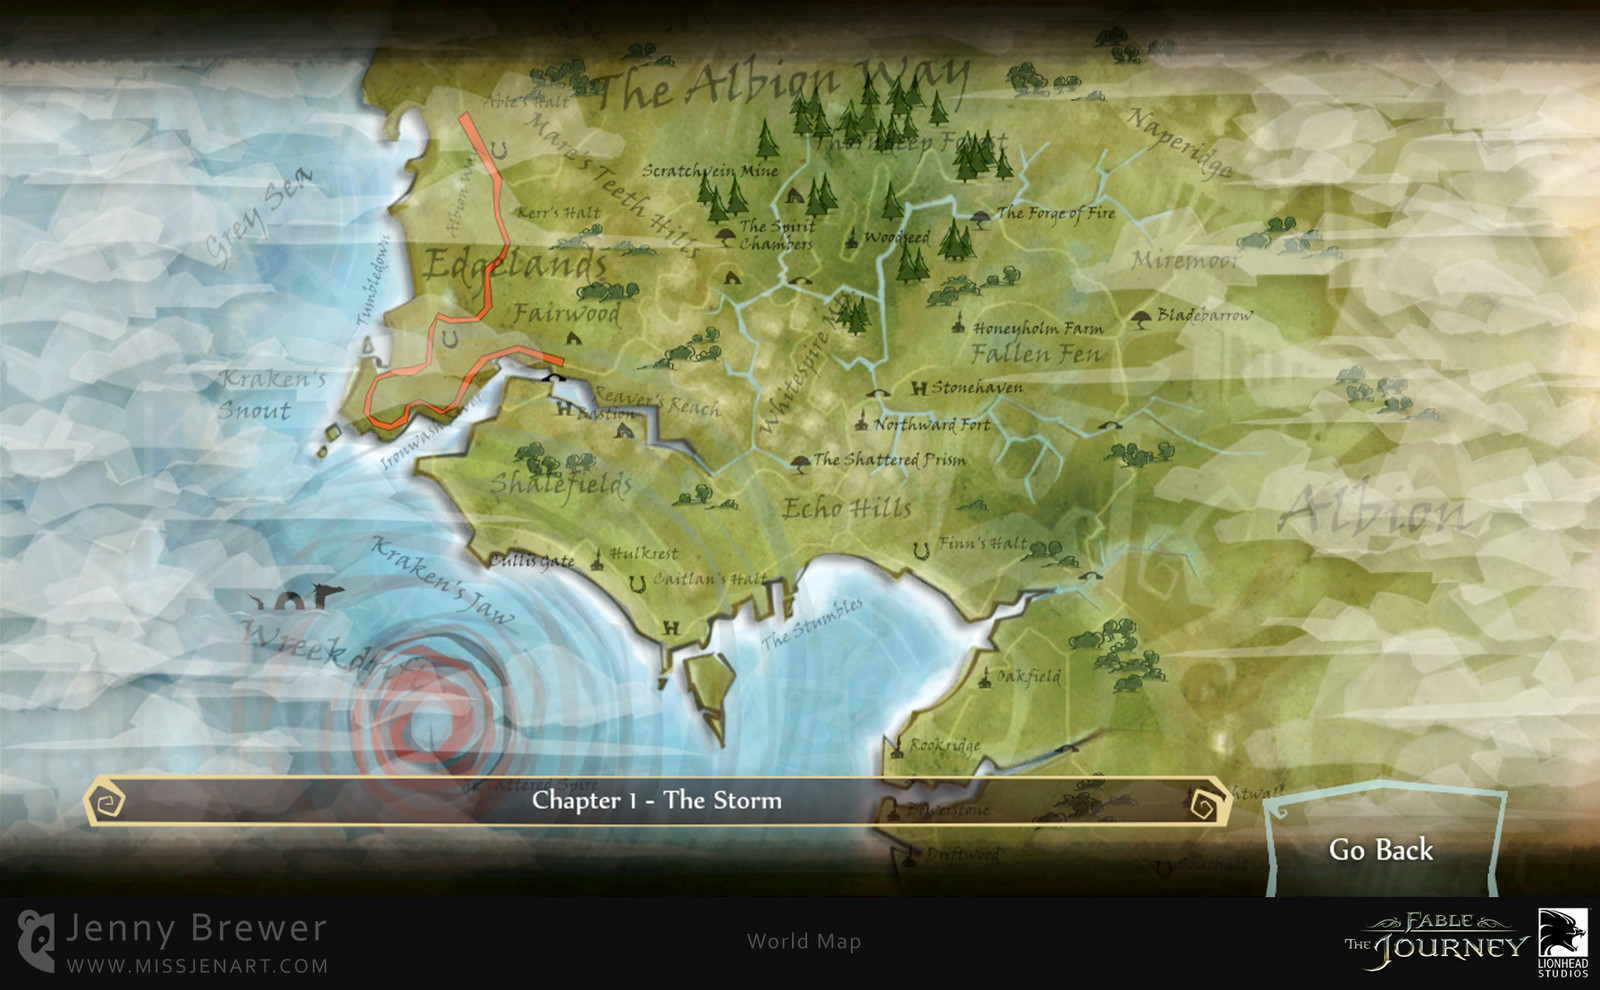 The Map screen shows your progress through the story of the game and is filled with little animations such as mini retelling of parts of the story, parting clouds, growing trees and hidden sea monsters for those with a keen eye!